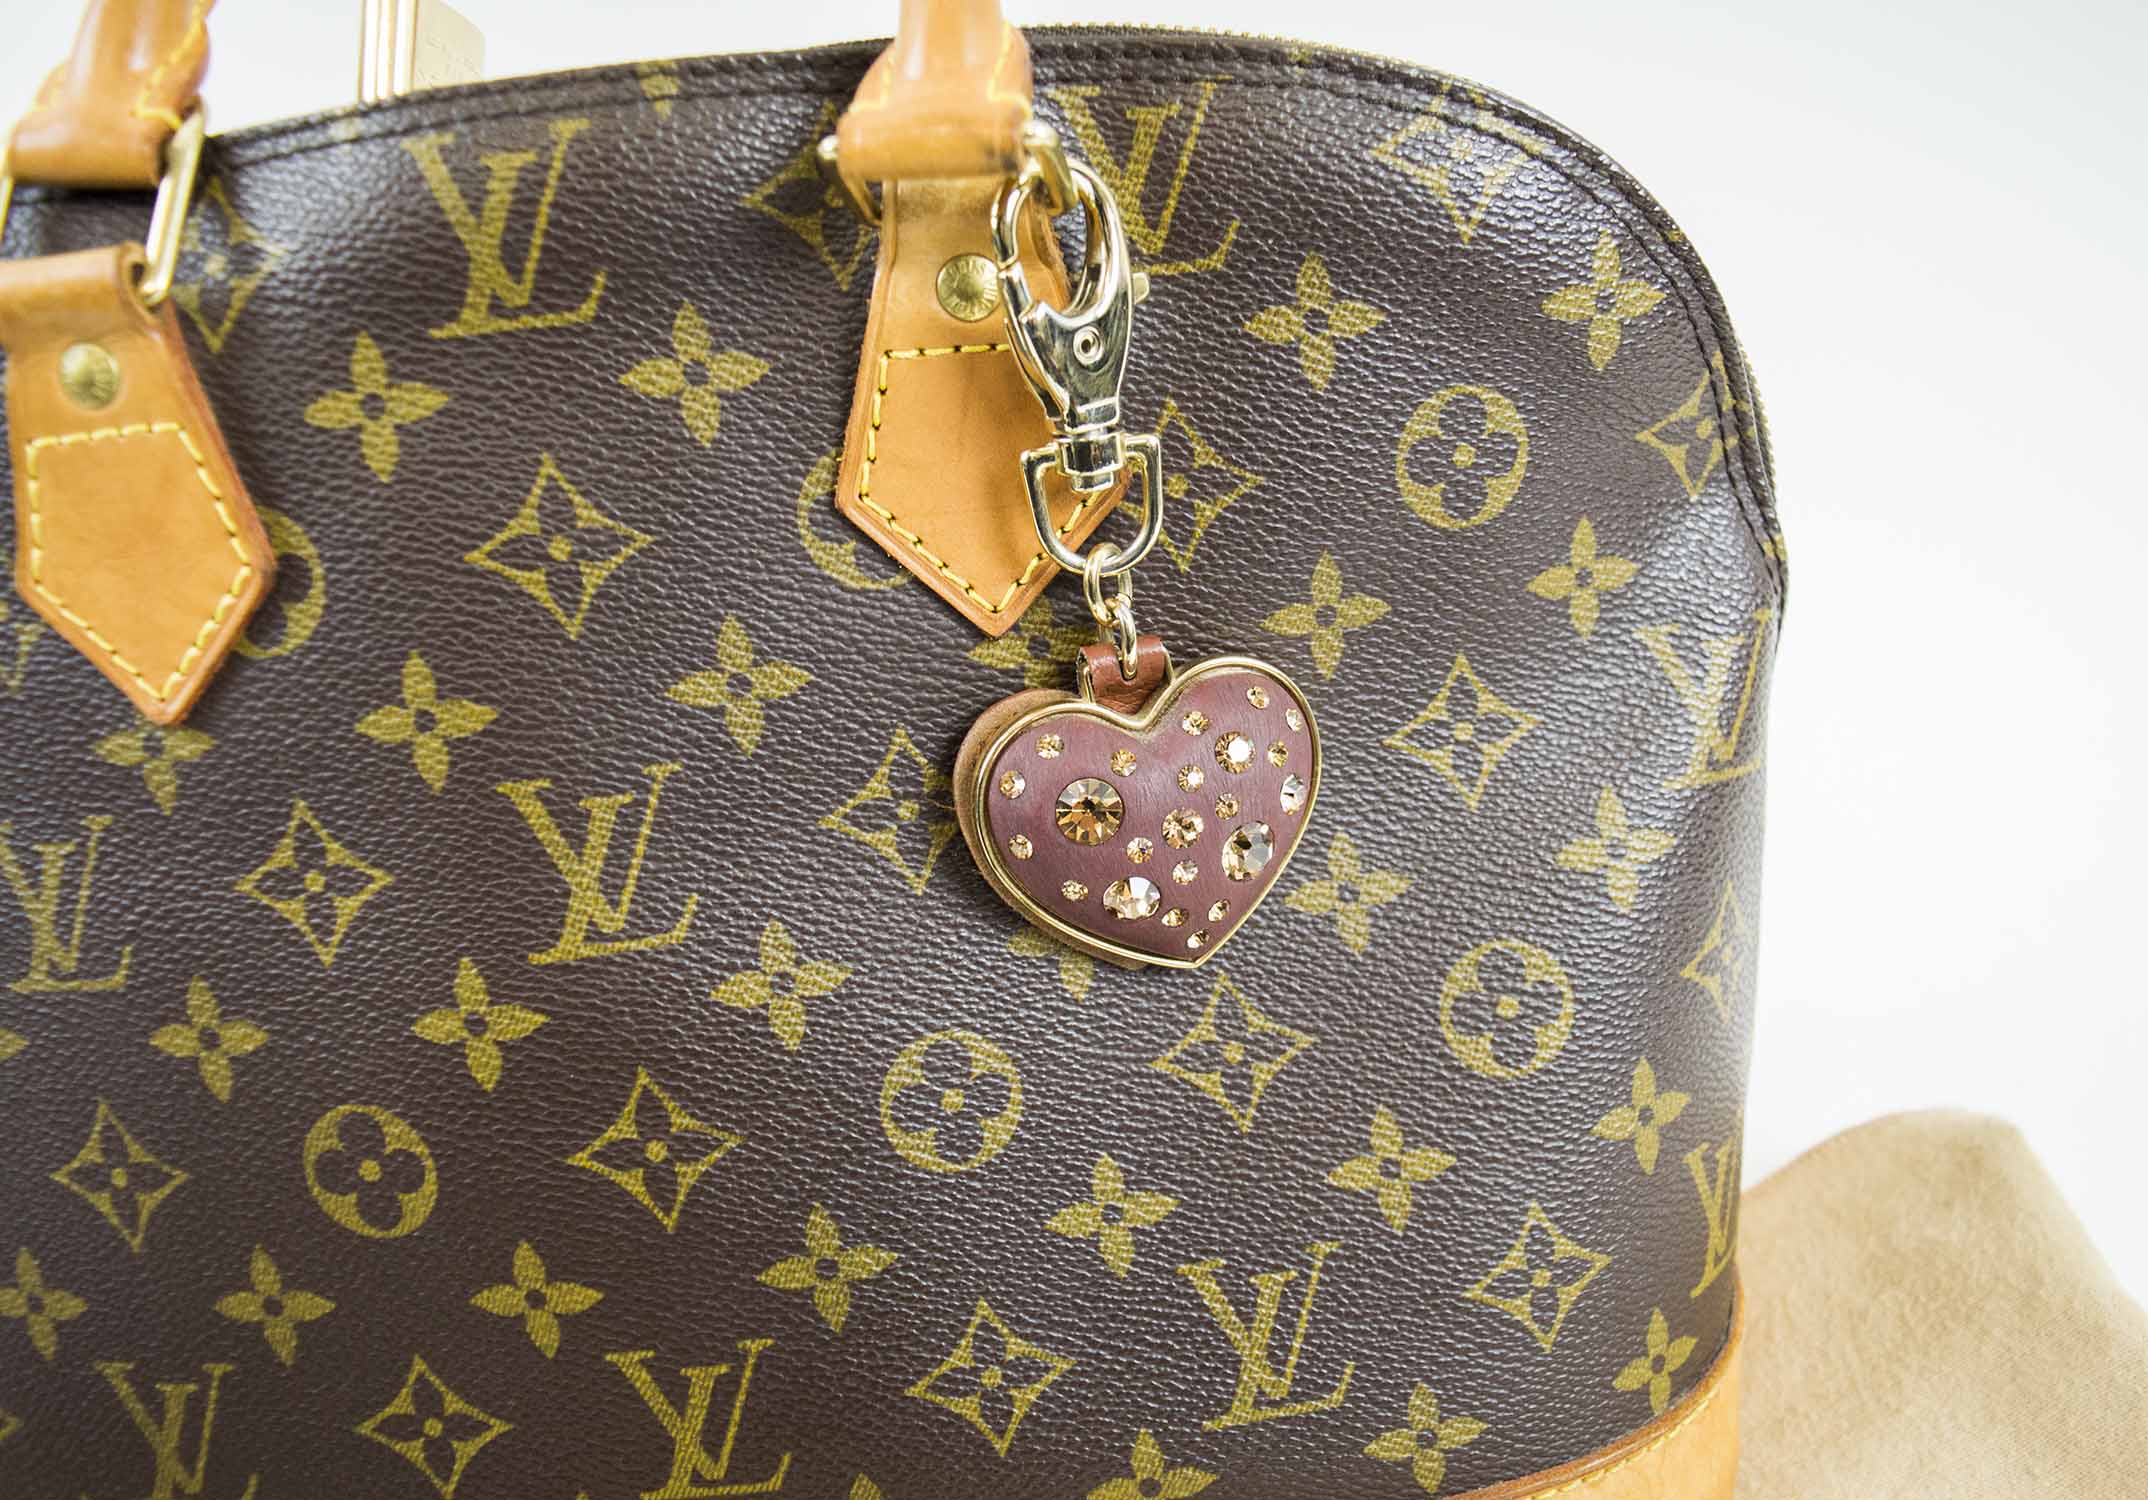 Sold at Auction: Louis Vuitton, Louis Vuitton Key Chain With Charms